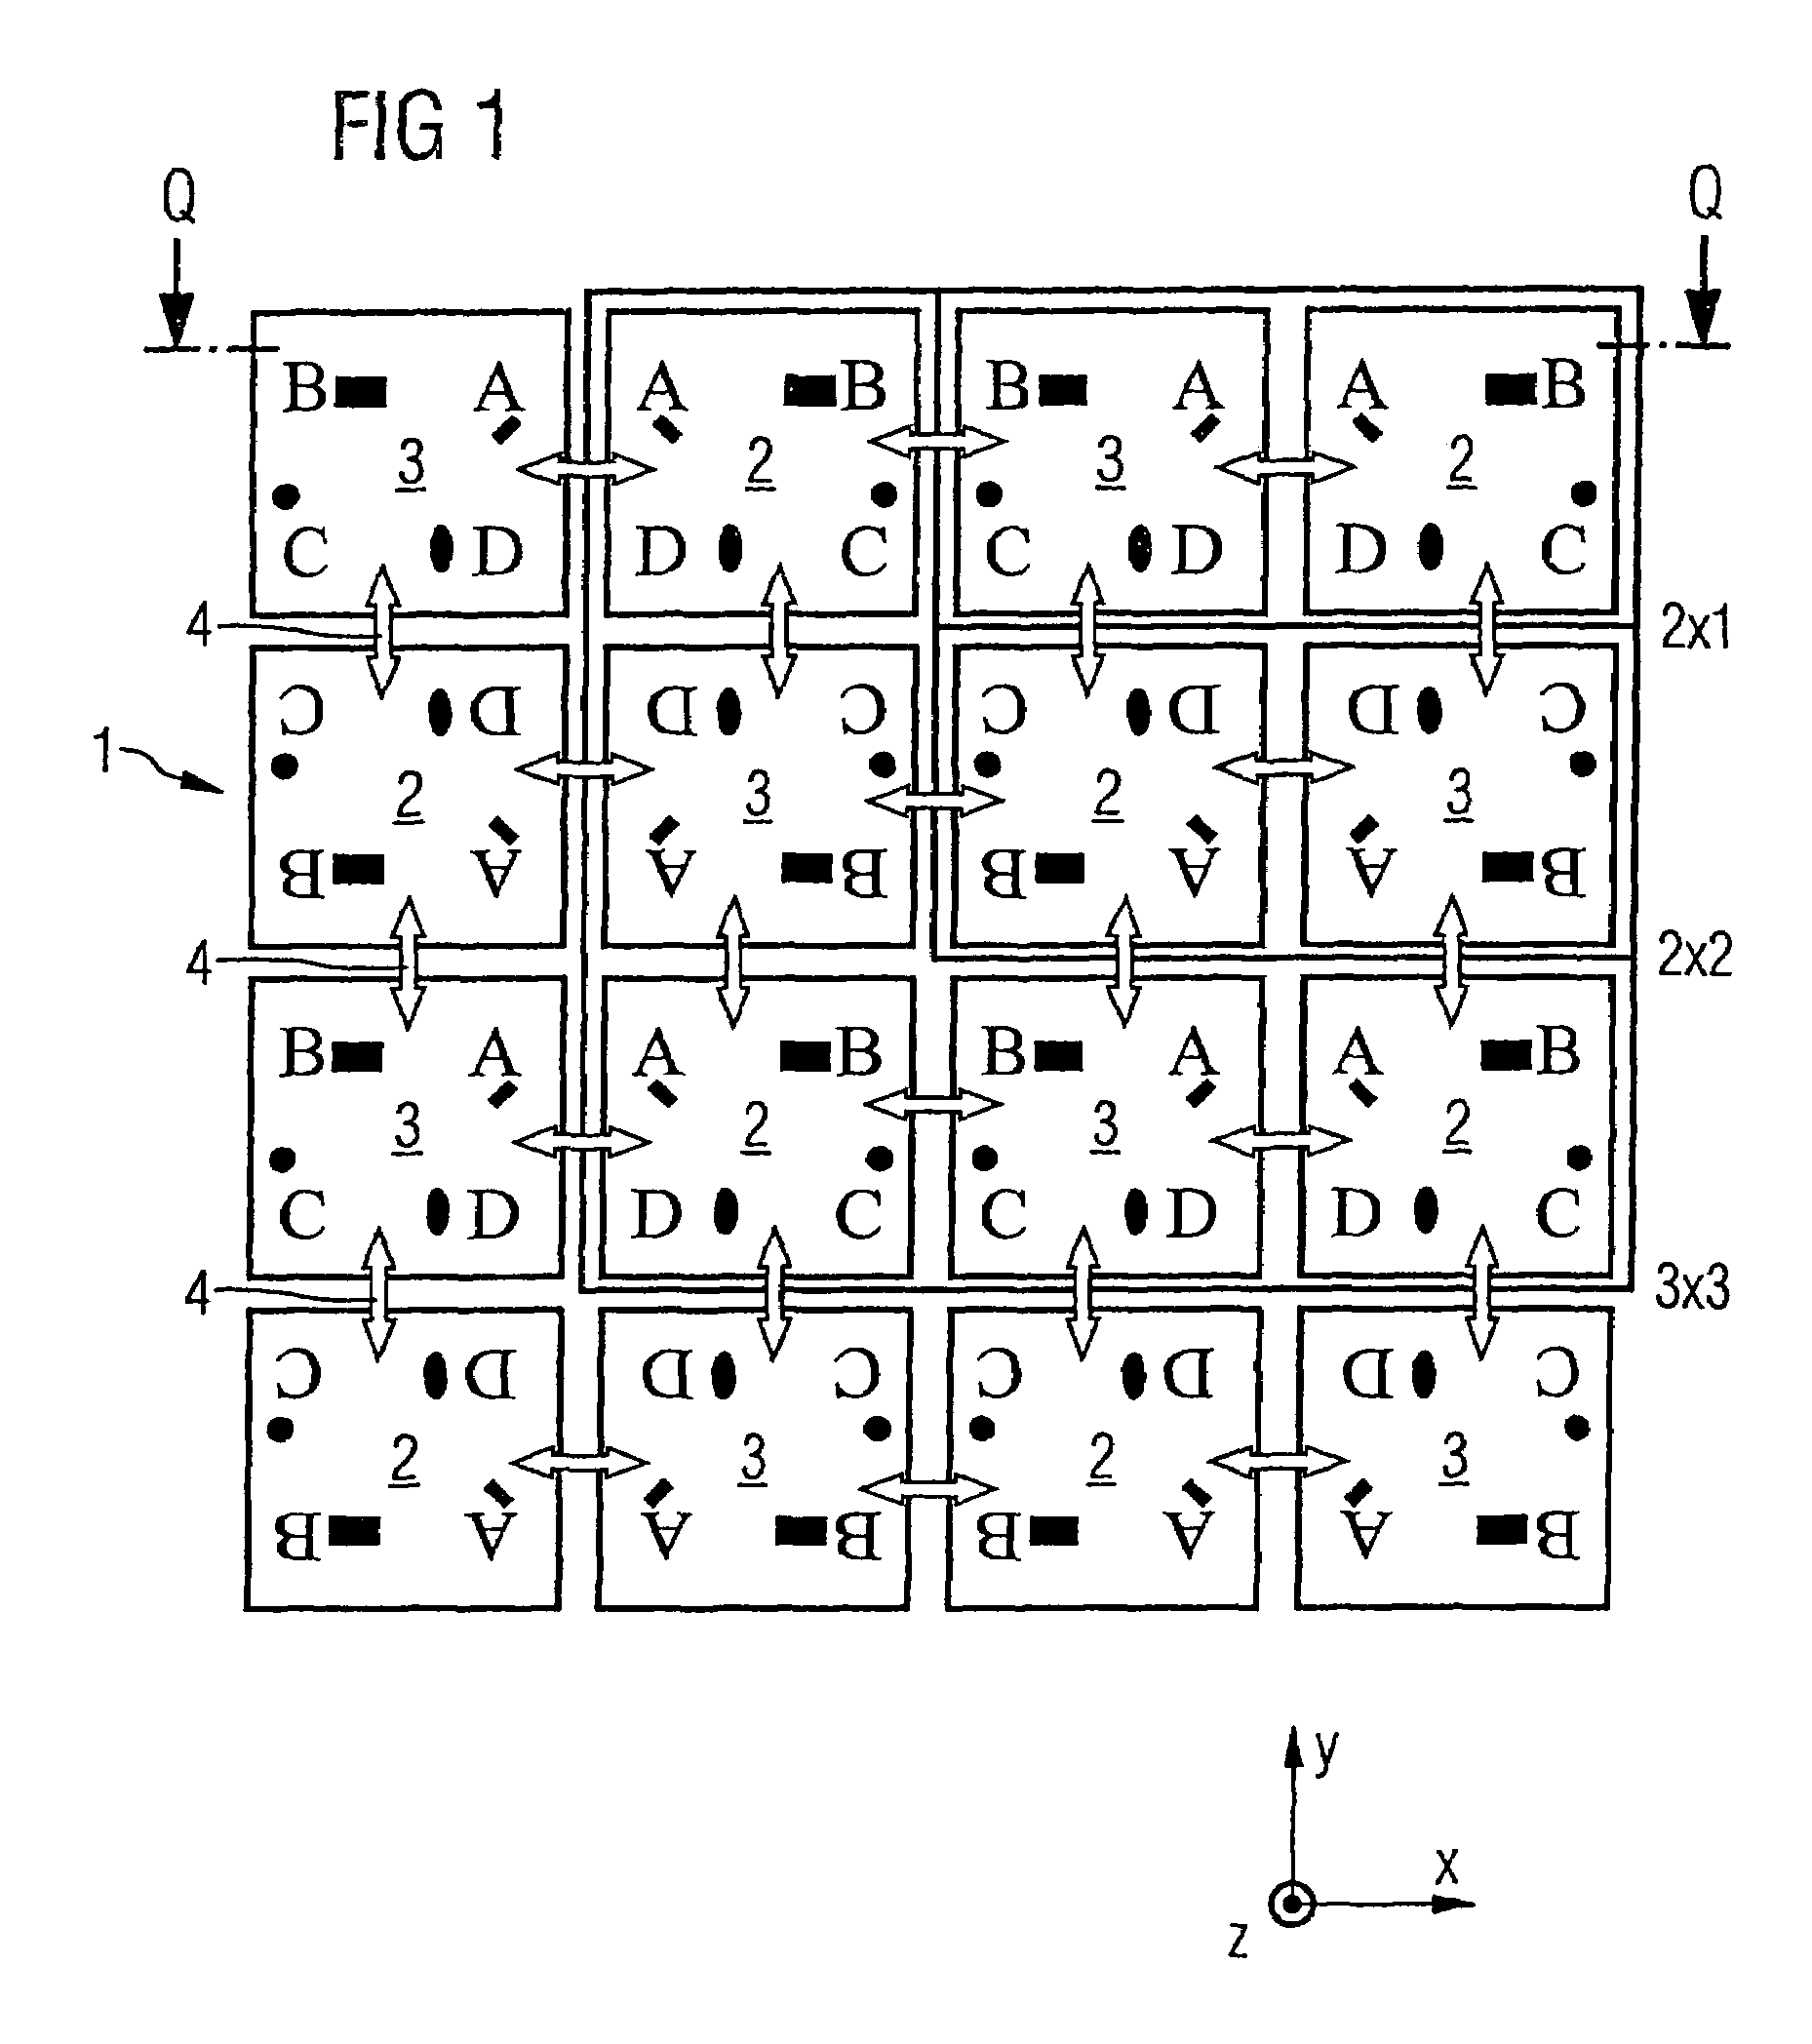 Multichip module including a plurality of semiconductor chips, and printed circuit board including a plurality of components